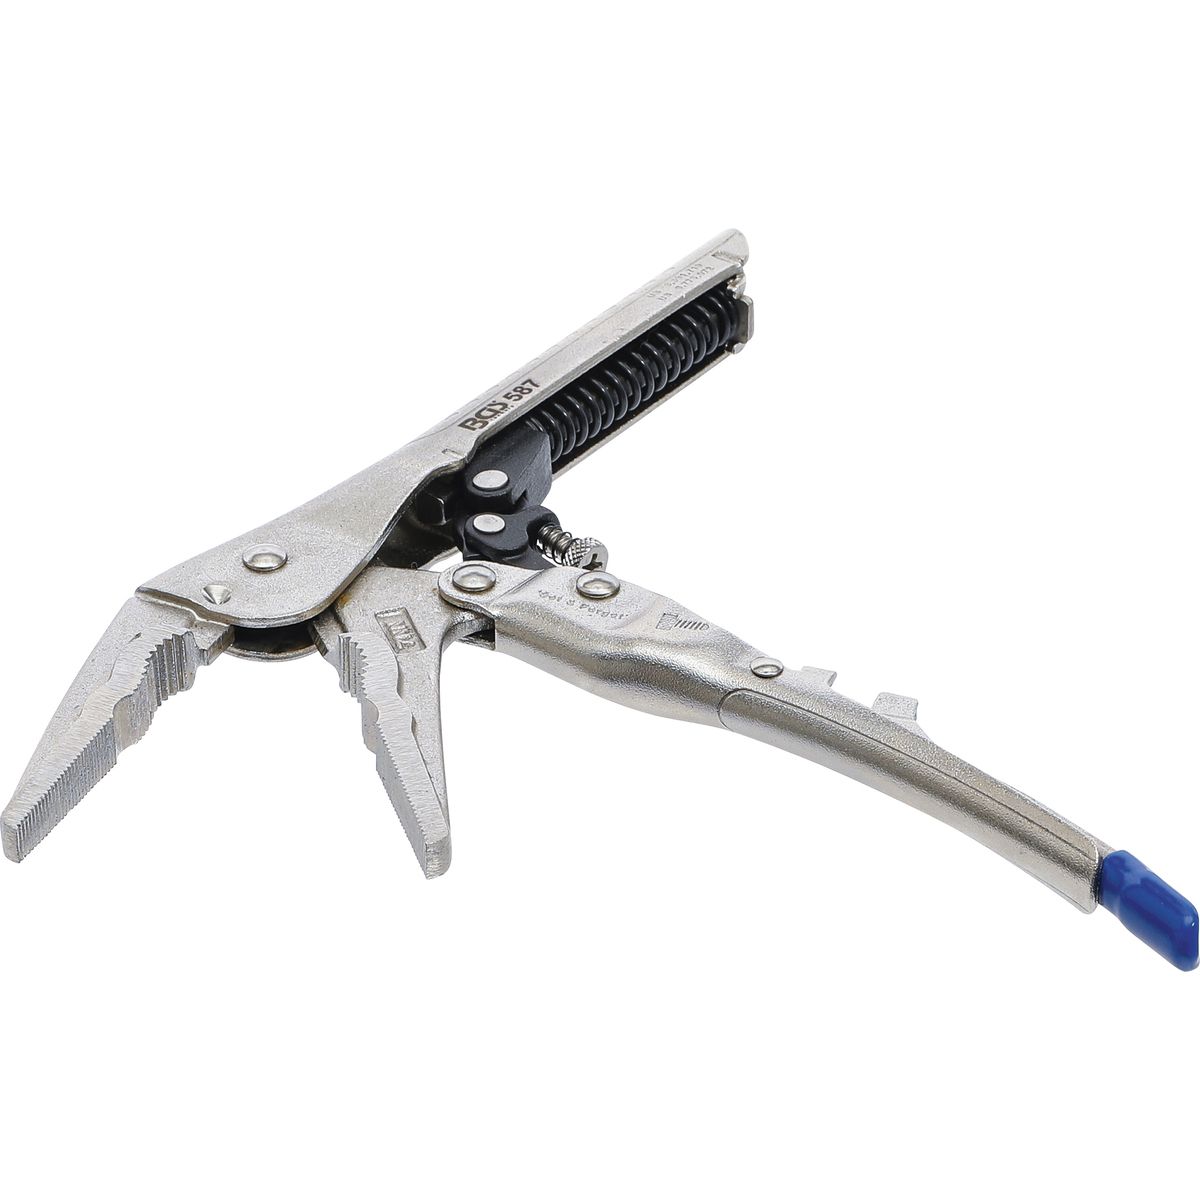 Automatic Locking Long Nose Grip Pliers | 190 mm